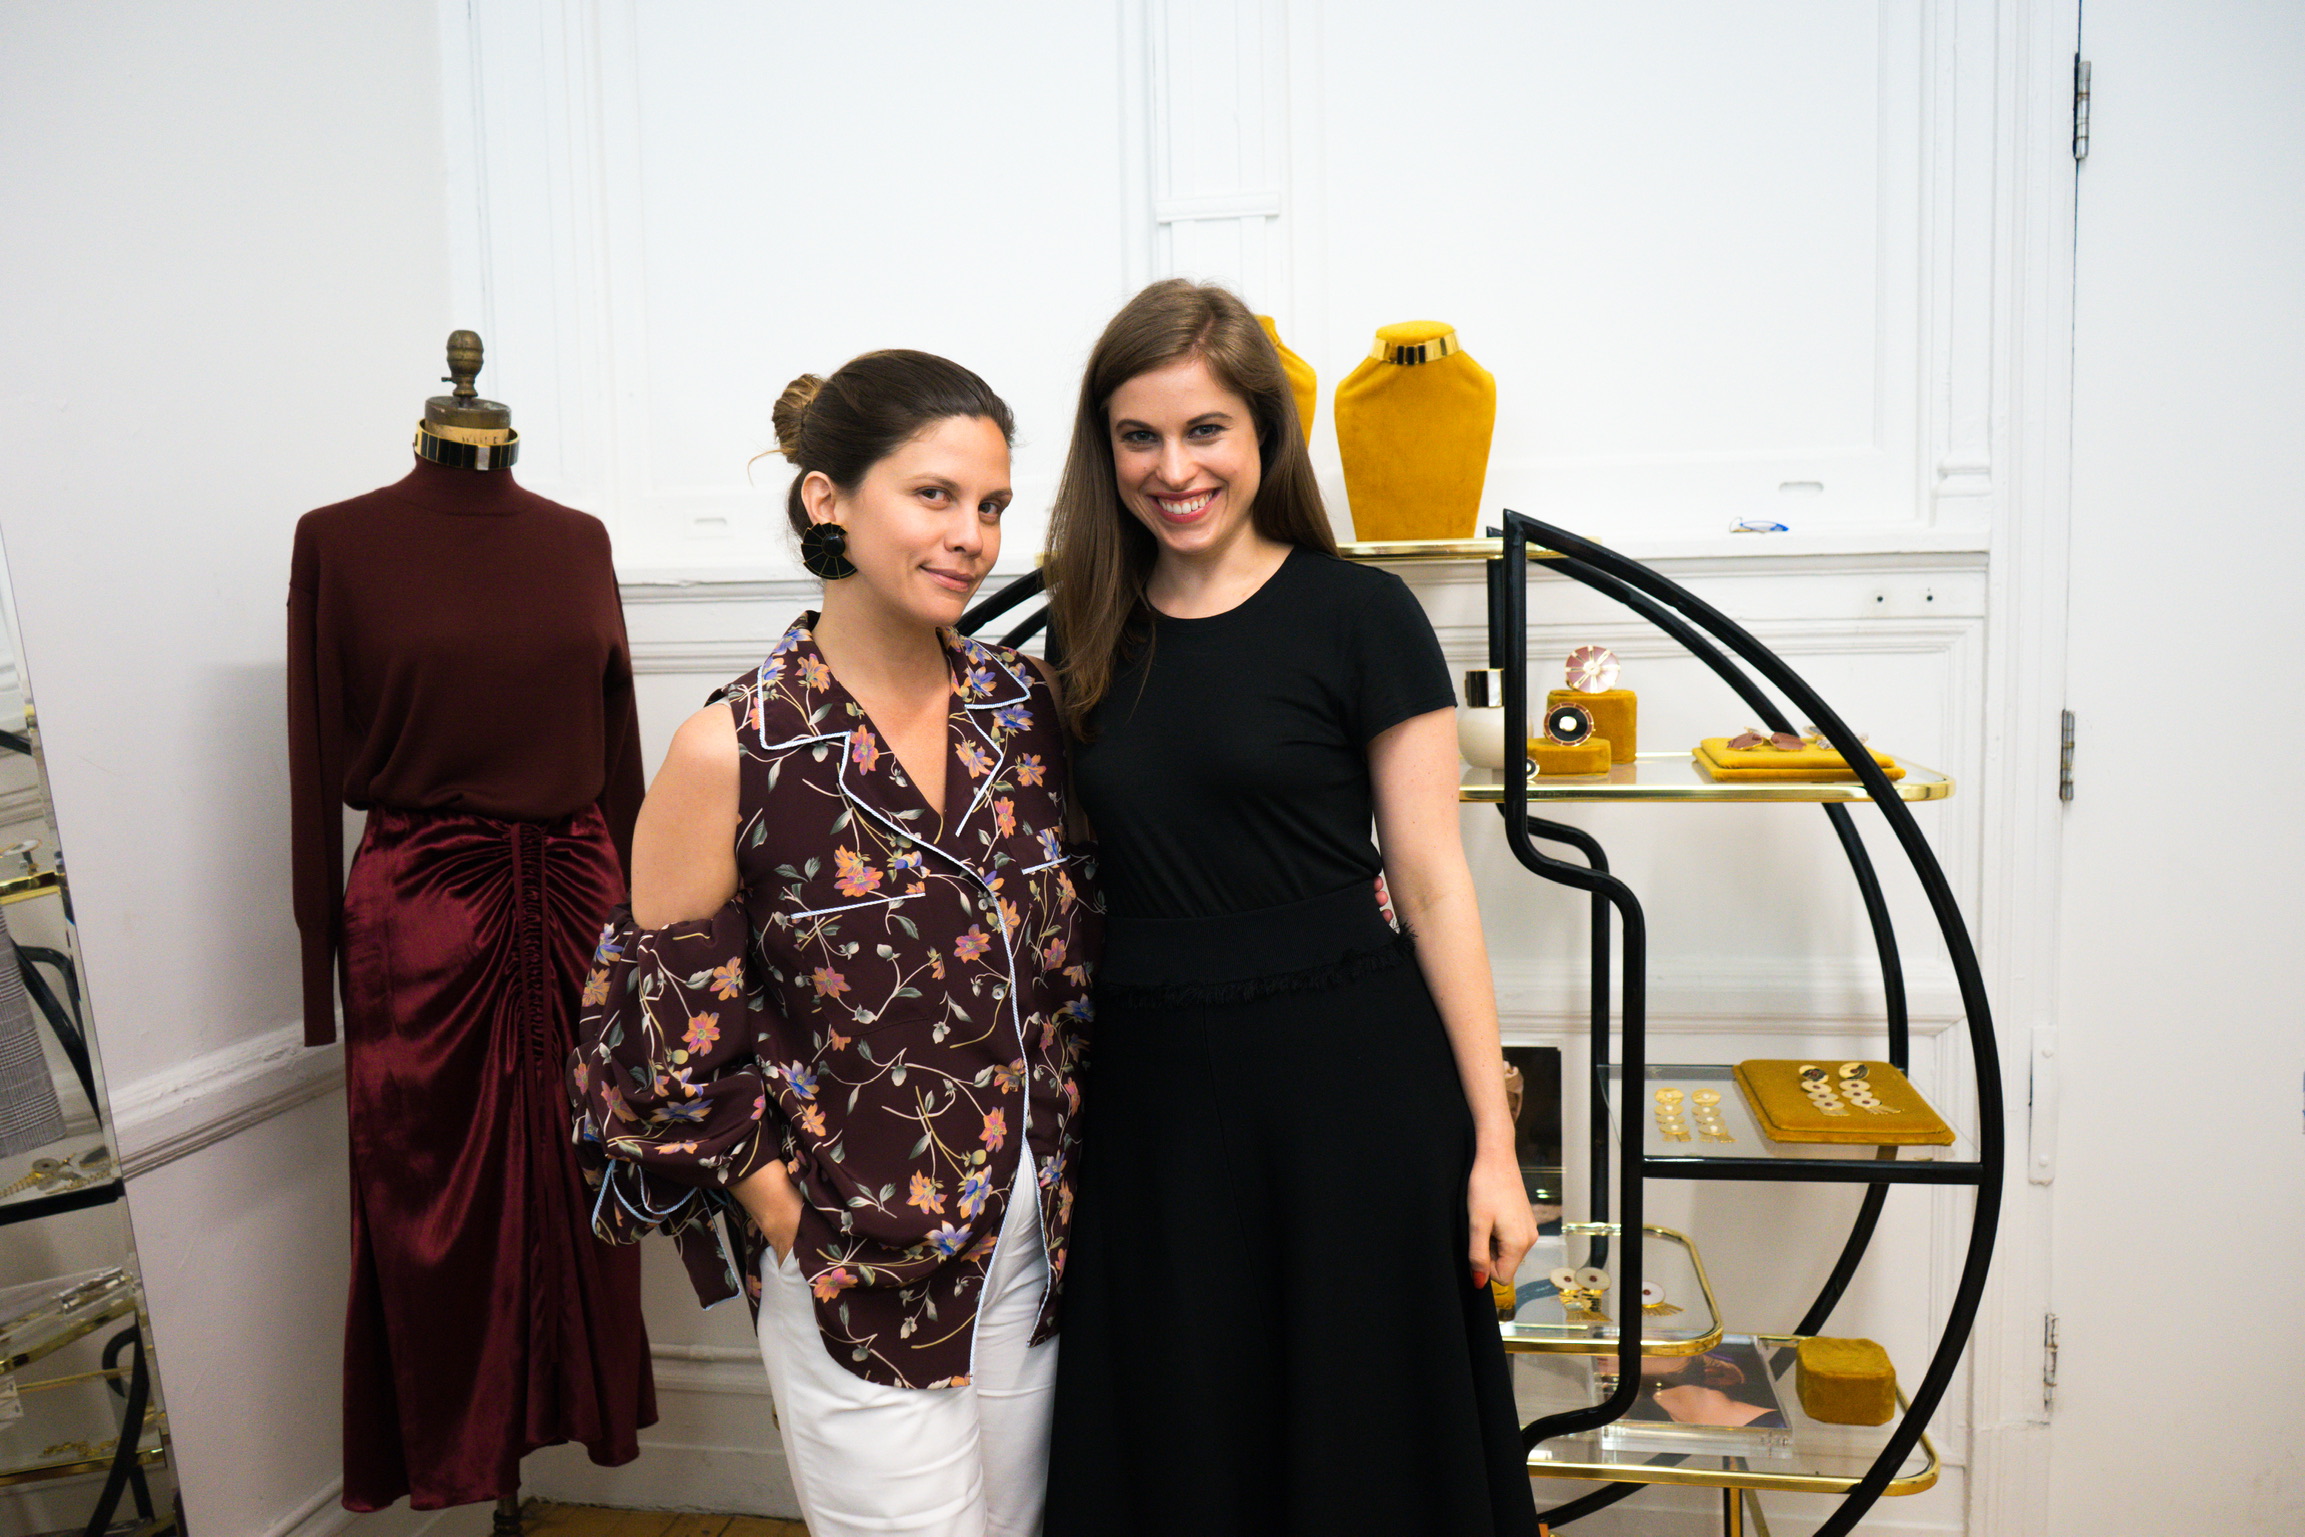 Two women standing in front of a jewelry display & a mannequin: one wearing a printed top & white jeans, the other wearing an all-black look - they both have brown hair